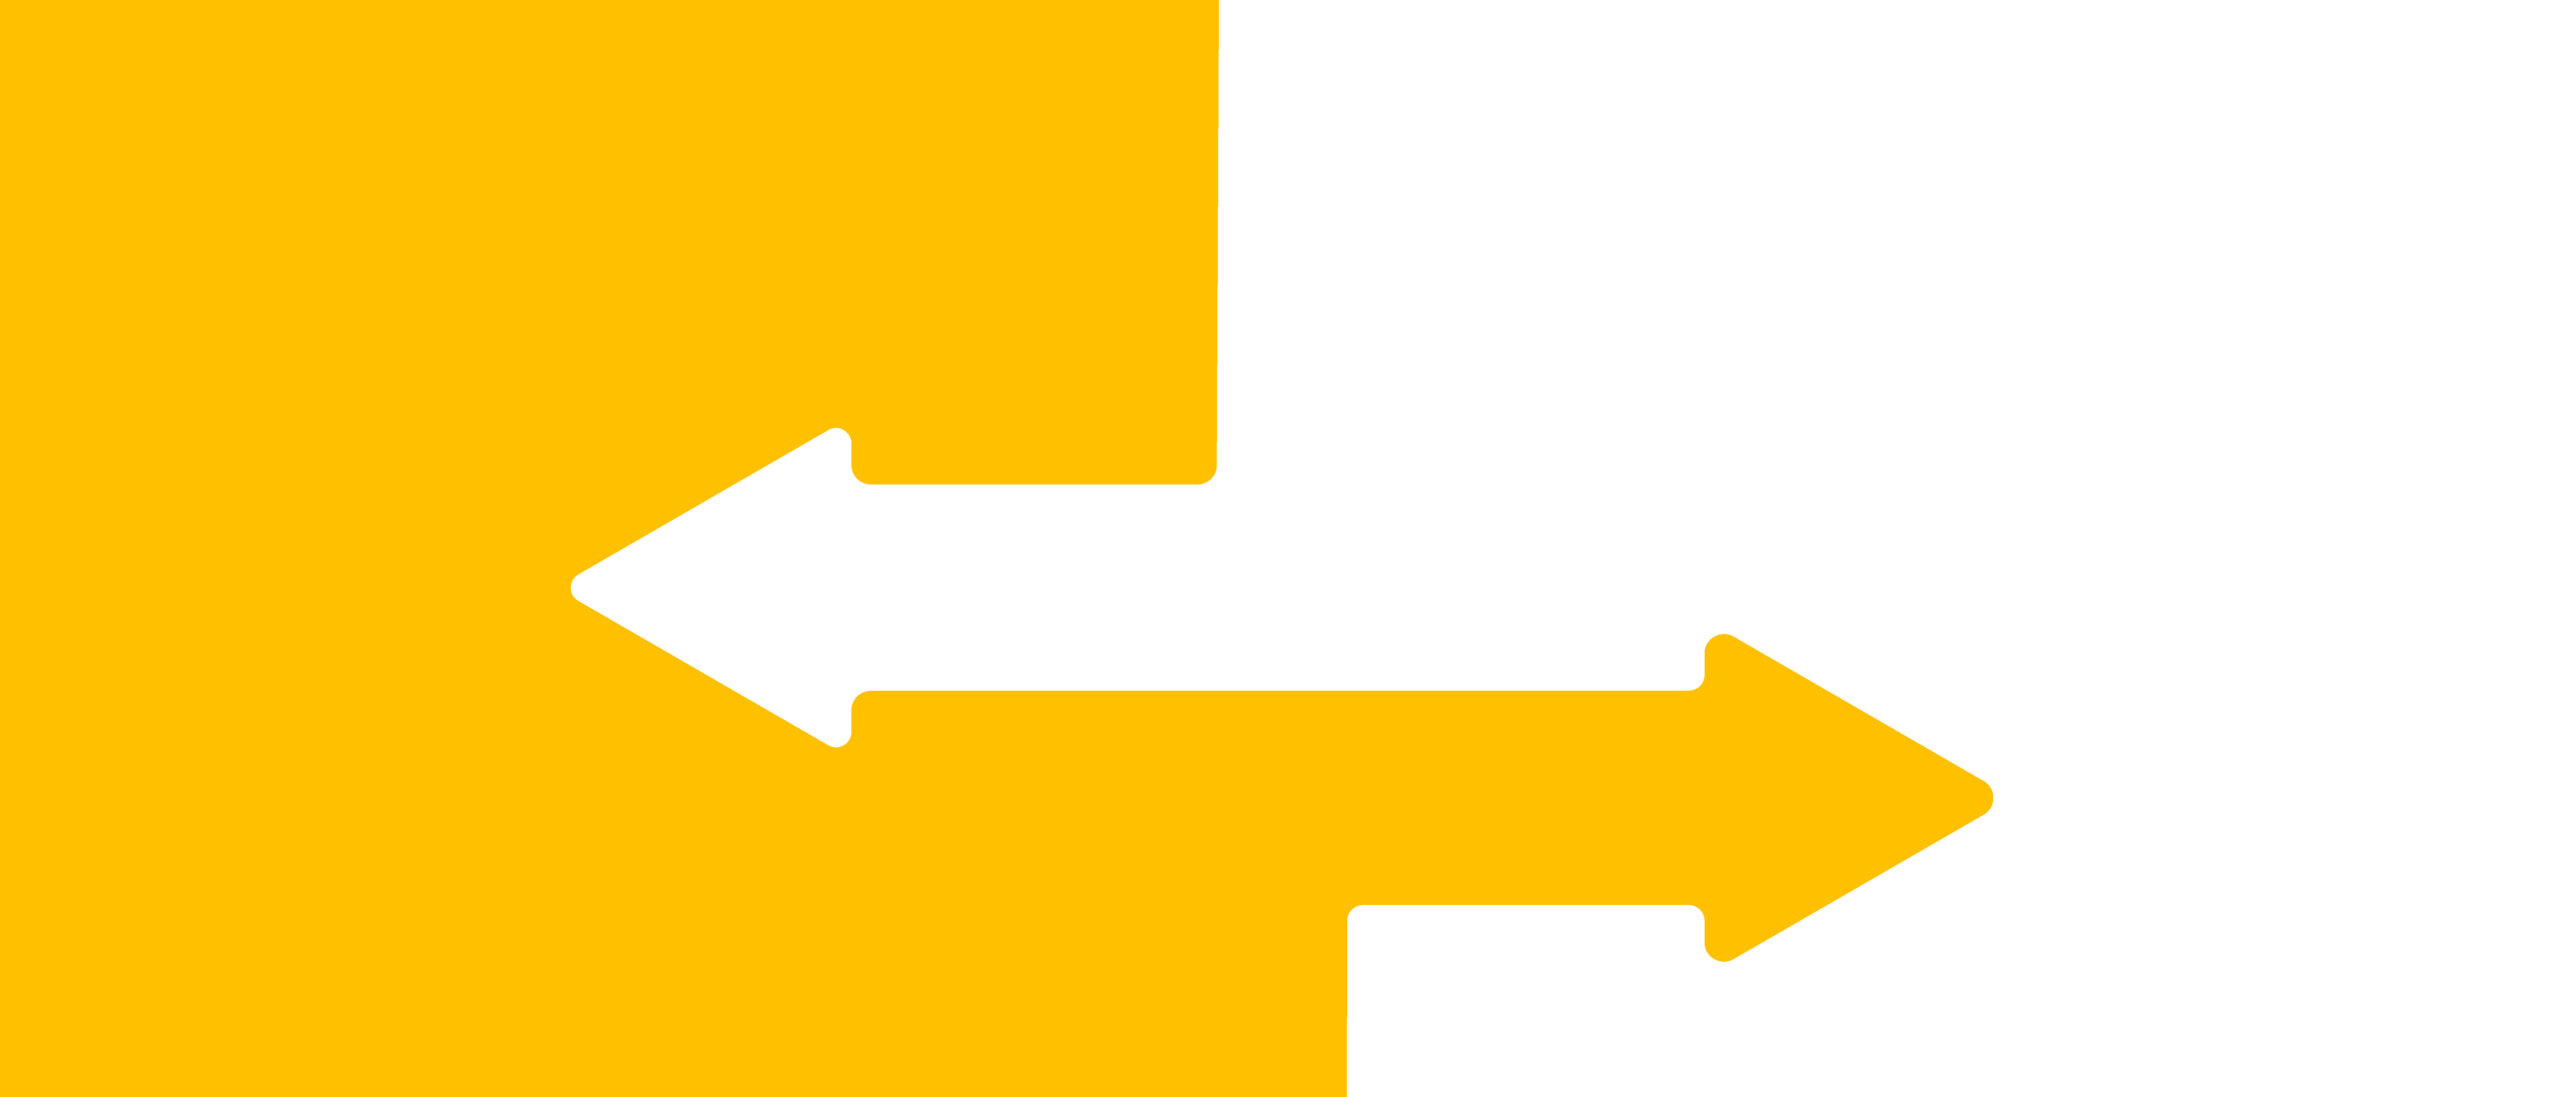 illustration of 2 arrow pointing in opposite directions in yellow and white